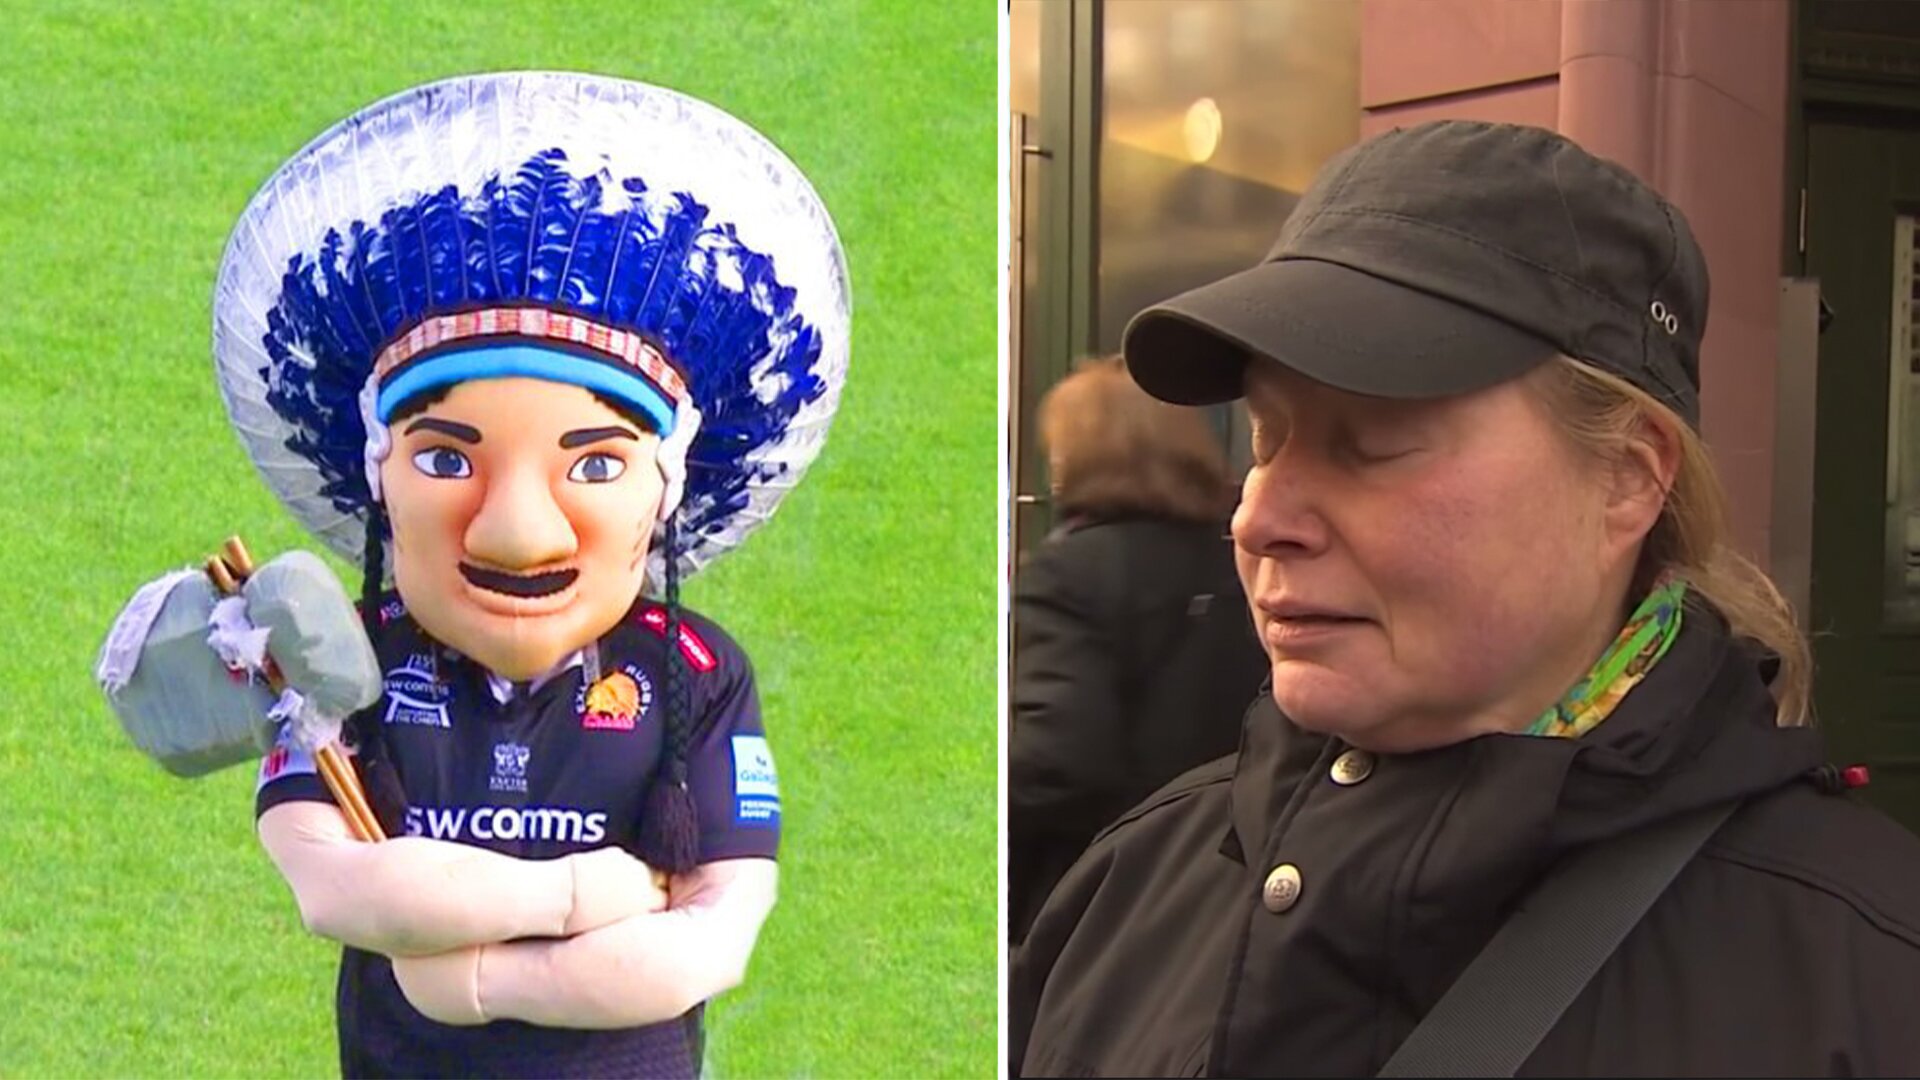 Exeter Chiefs fans that campaigned to change branding are not handling the news well